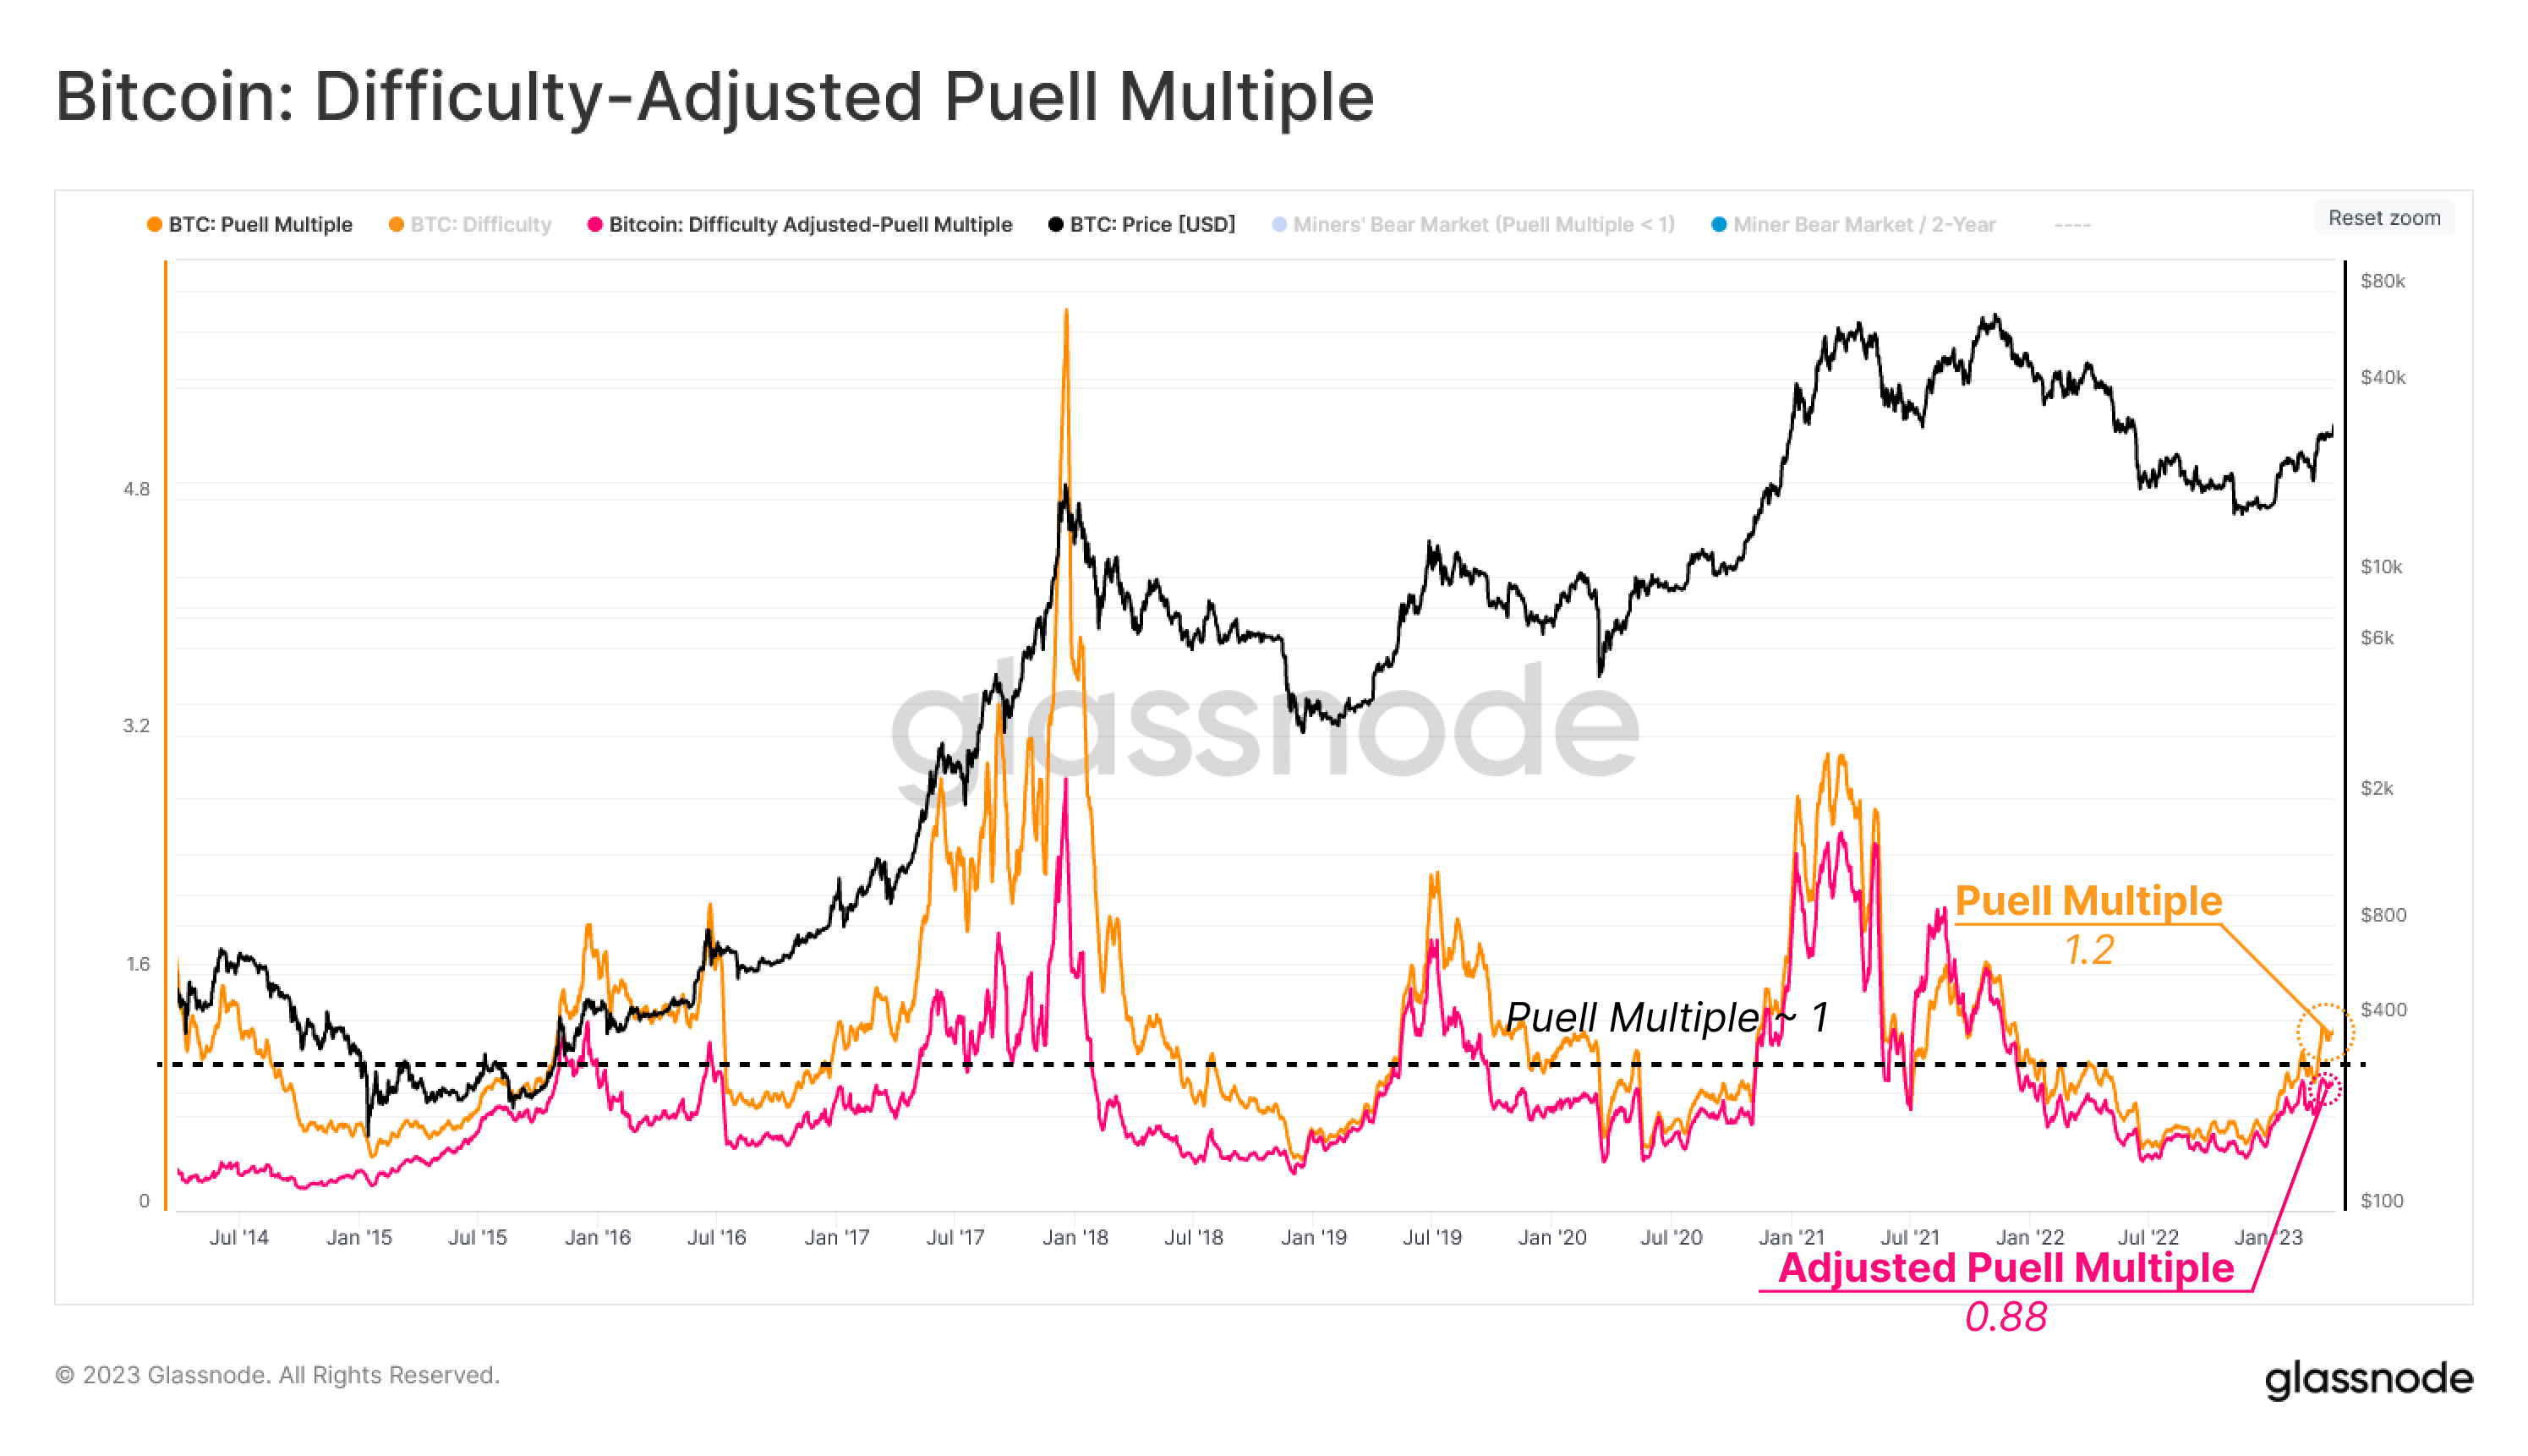 BTC difficulty adjusted Puell Multiple